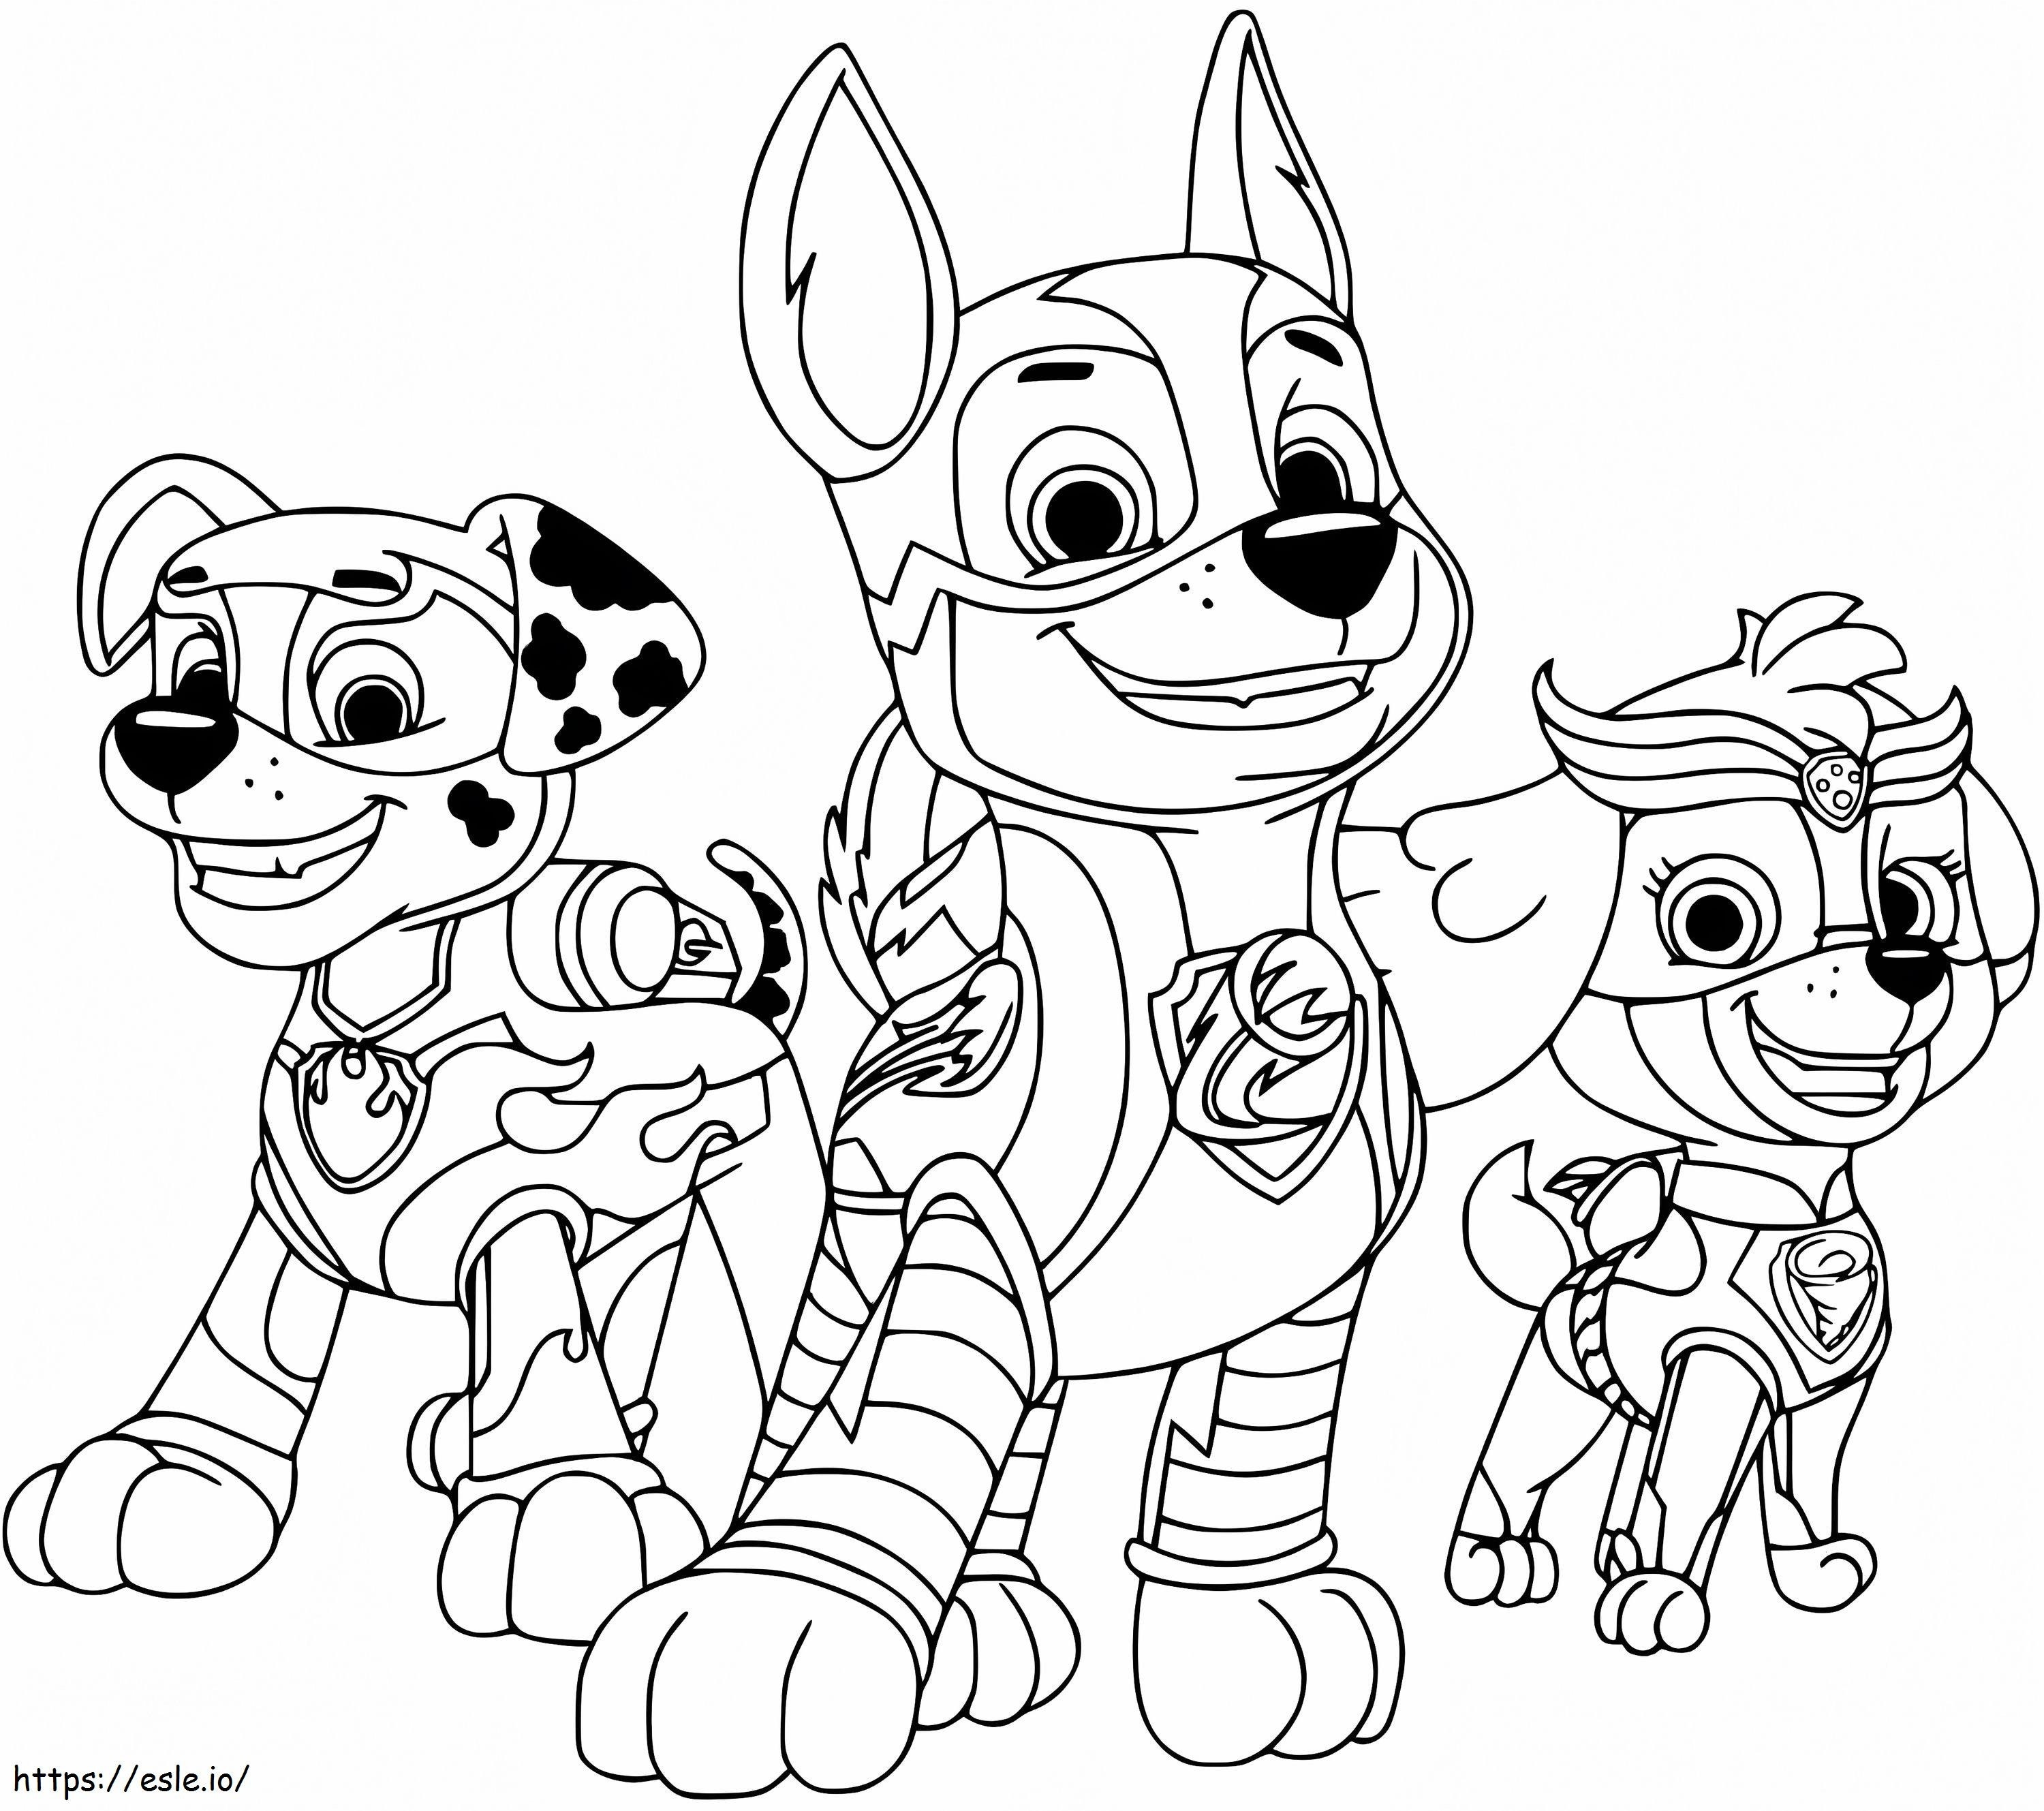 Amazing Mighty Pups coloring page